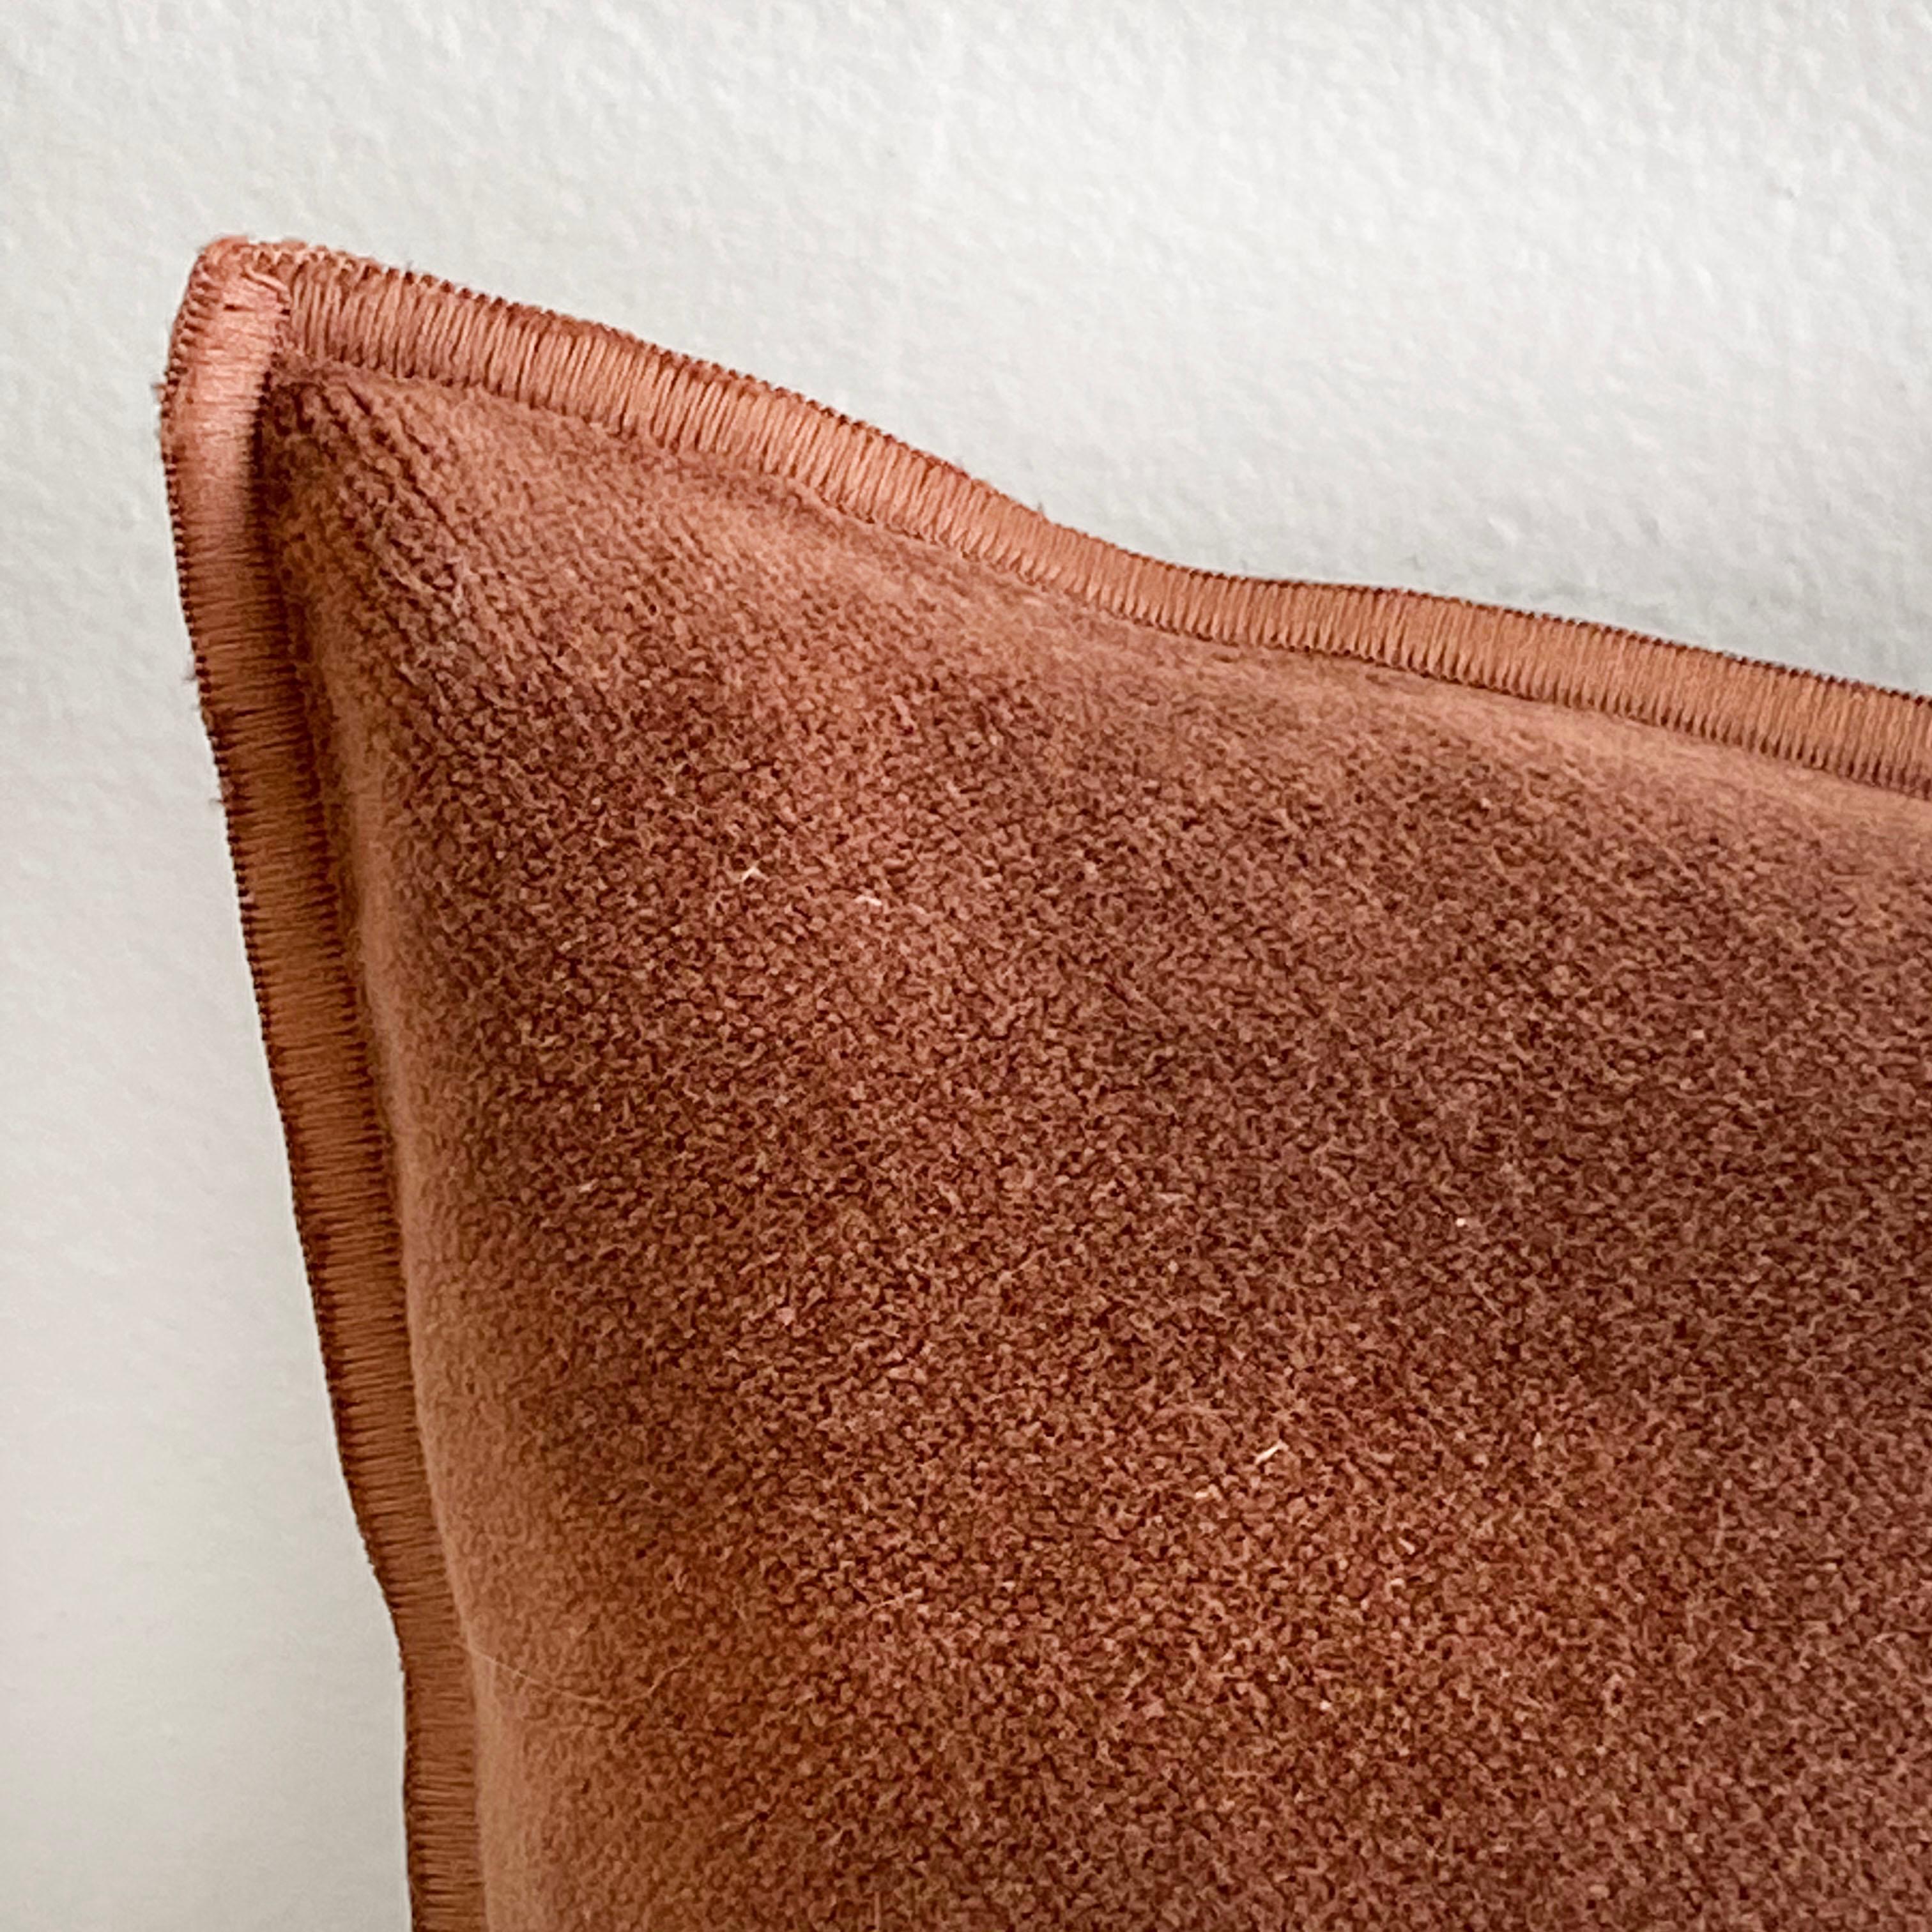 European vintage velvet accent pillow with down feather insert
Color: Argile vintage velvet (Dark Rust Blush Tone) zipper closure, with decorative edge Made in France.
All items are custom made to order. Please allow 2-6 weeks for production.
Size: